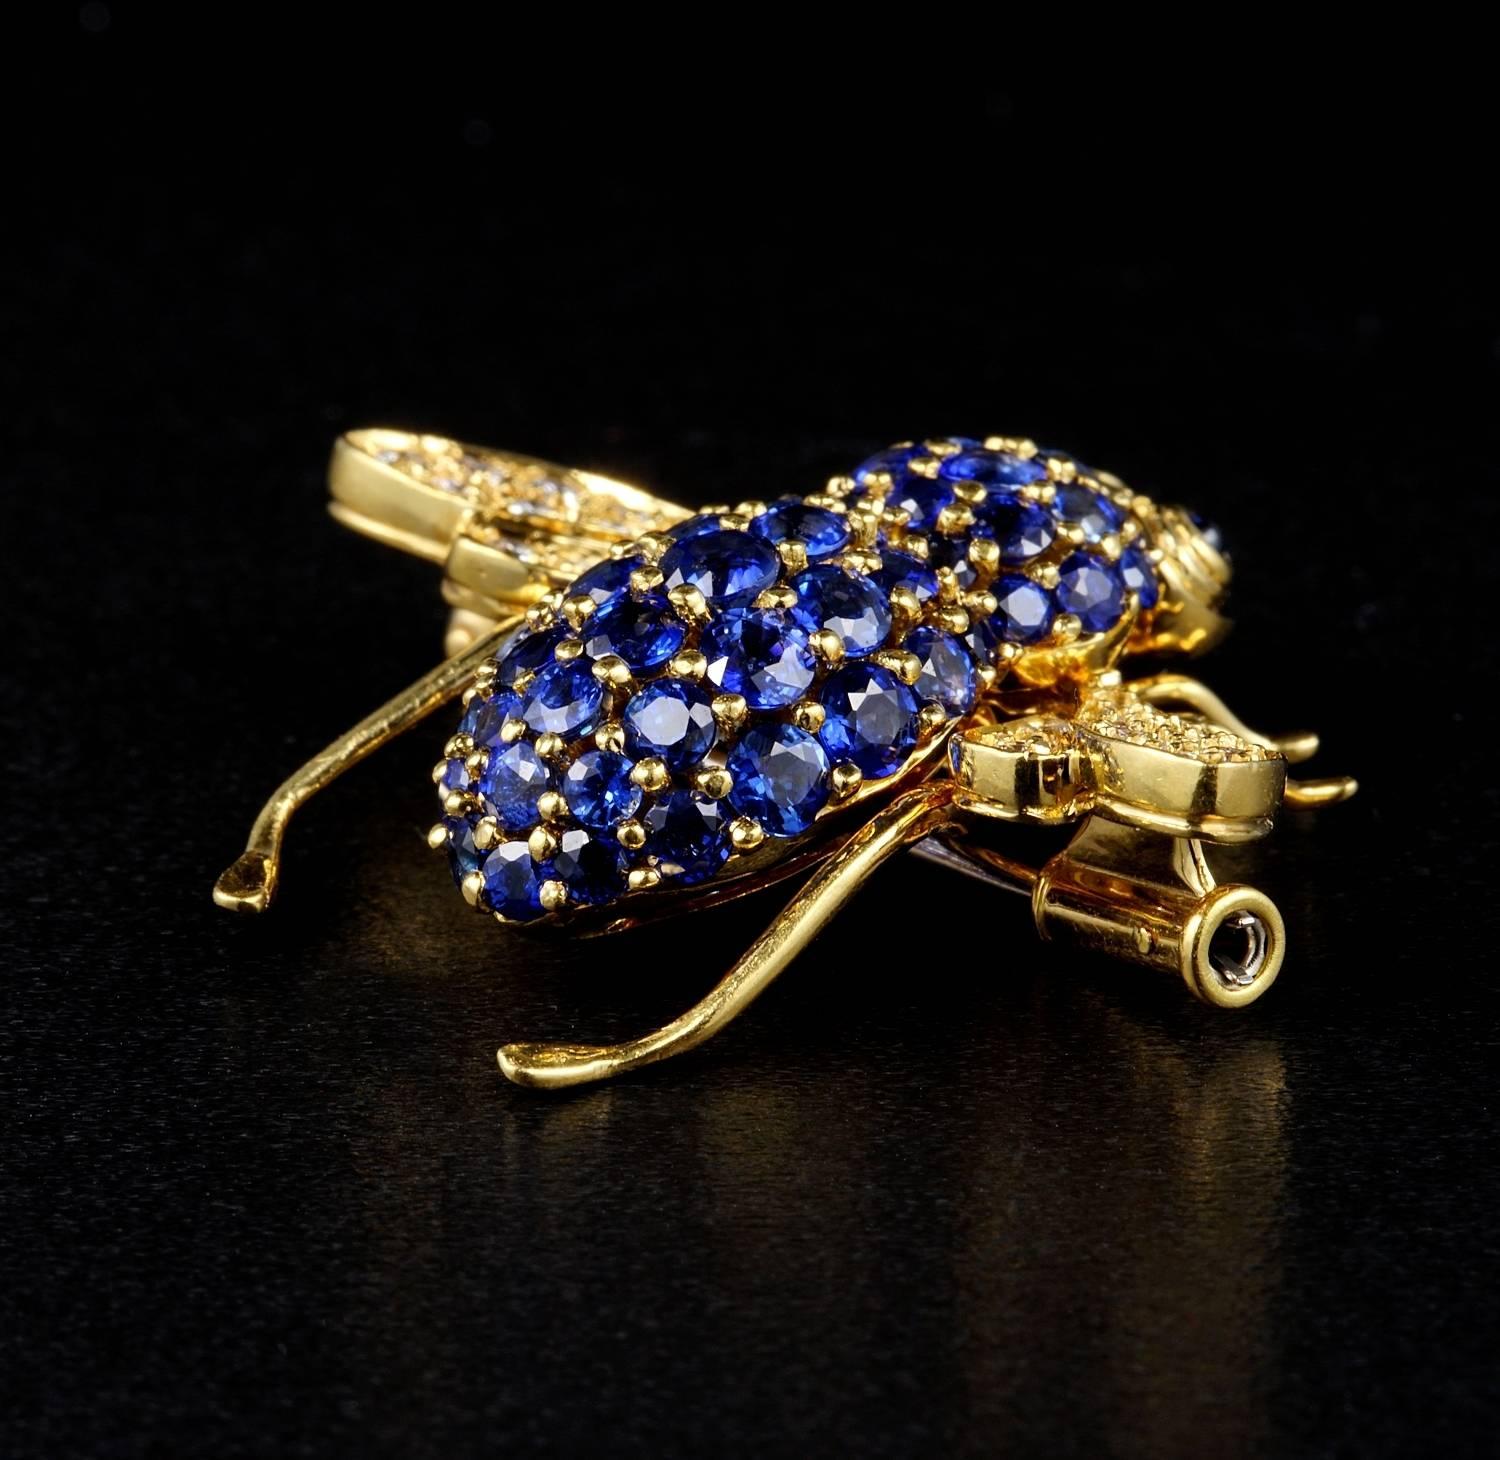 Women's Vintage 3.0 Carat Untreated Sapphire .80 Carat Diamond Bumble Bee Brooch For Sale